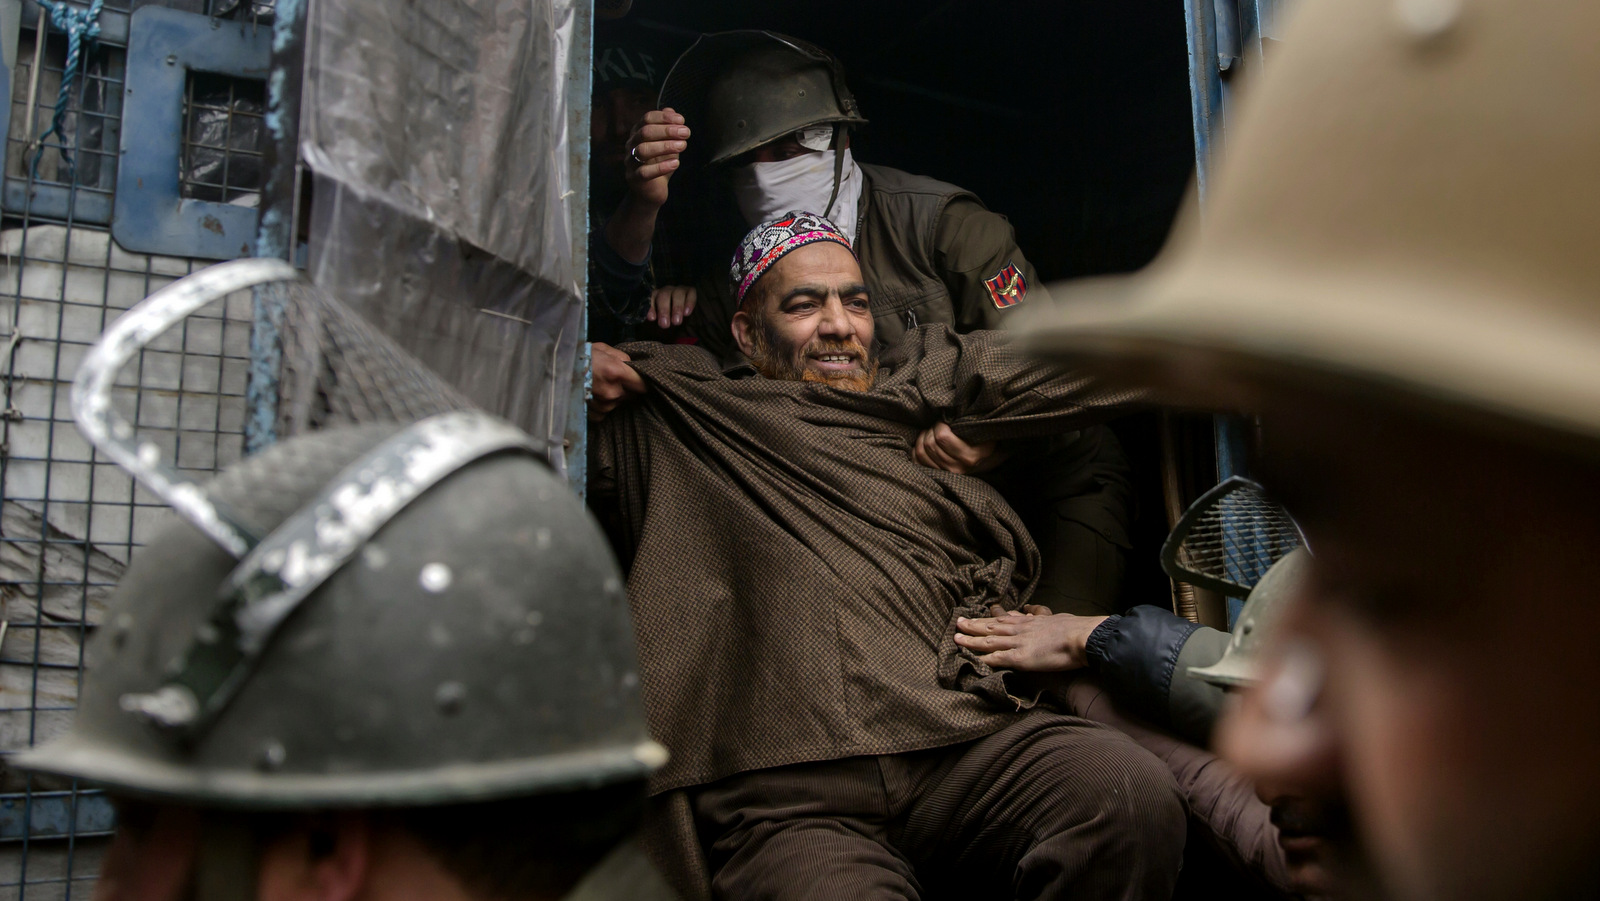 Indian riot police arrest a protester on the anniversary of protest leader Maqbool Bhat in Srinagar, Indian occupied Kashmir, Feb. 11, 2018. Indian authorities imposed a curfew in parts of Kashmir's main city to prevent anti-Indian protests after groups called a general strike demanding Bhat's remains, interred in a New Delhi Jail, be returned for a proper burial. (AP/Dar Yasin)